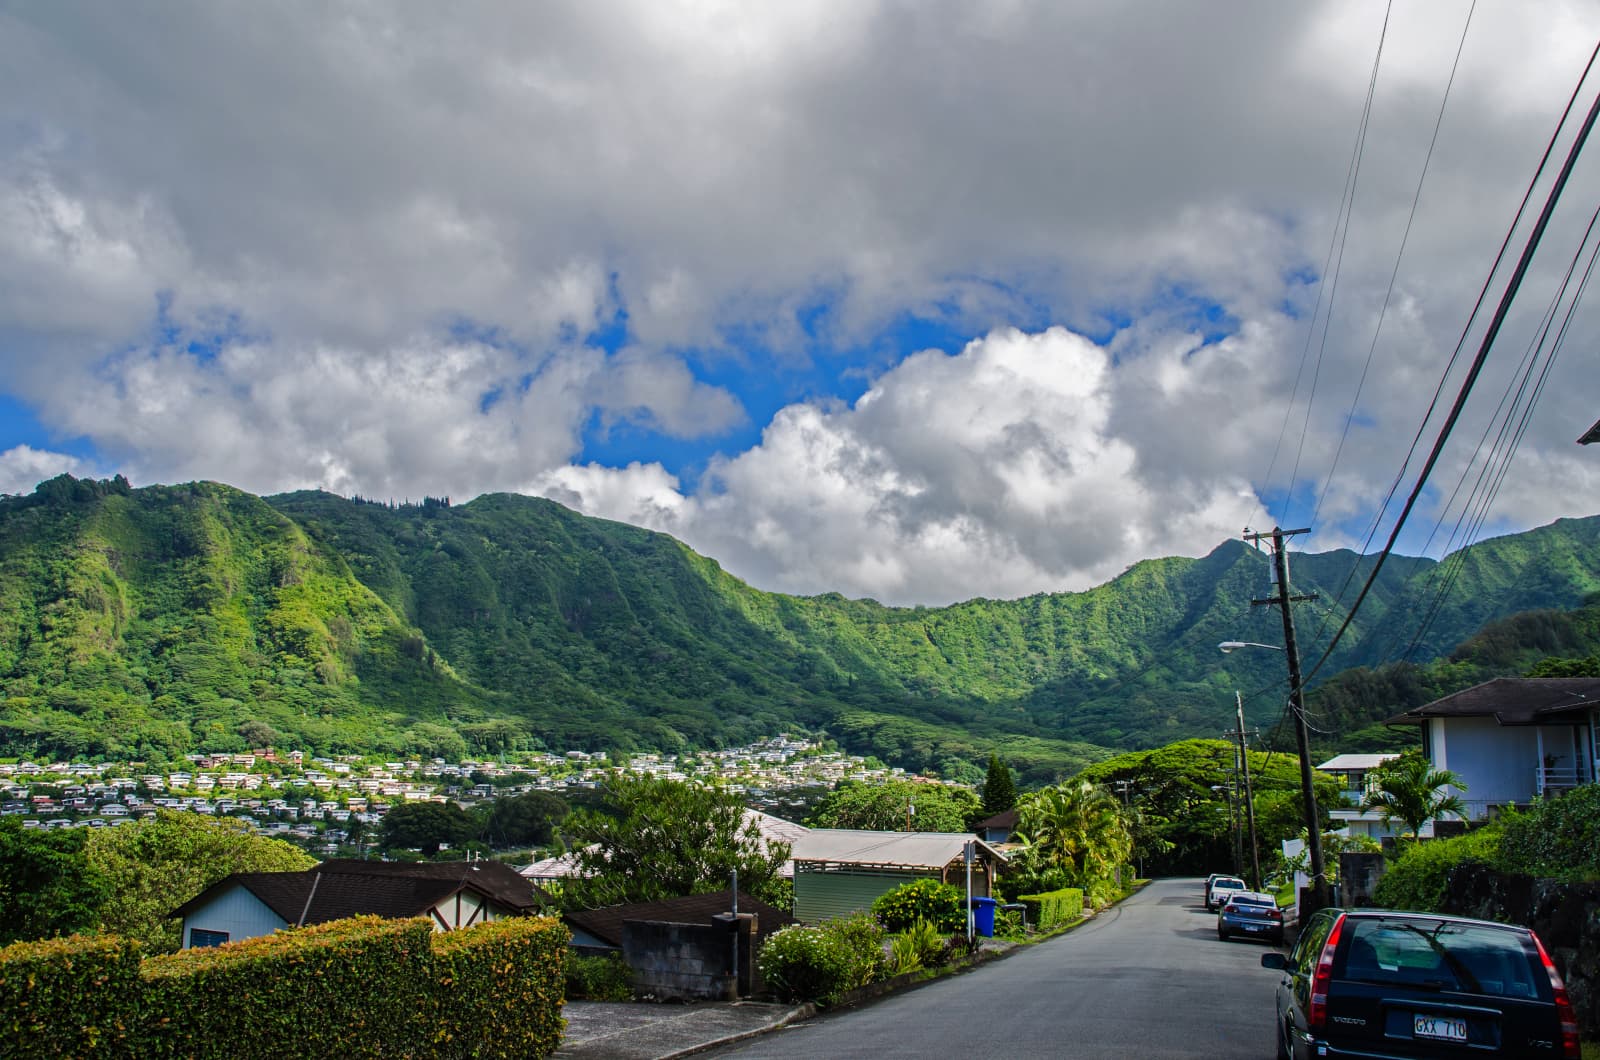 View of the lush greenery in Manoa 